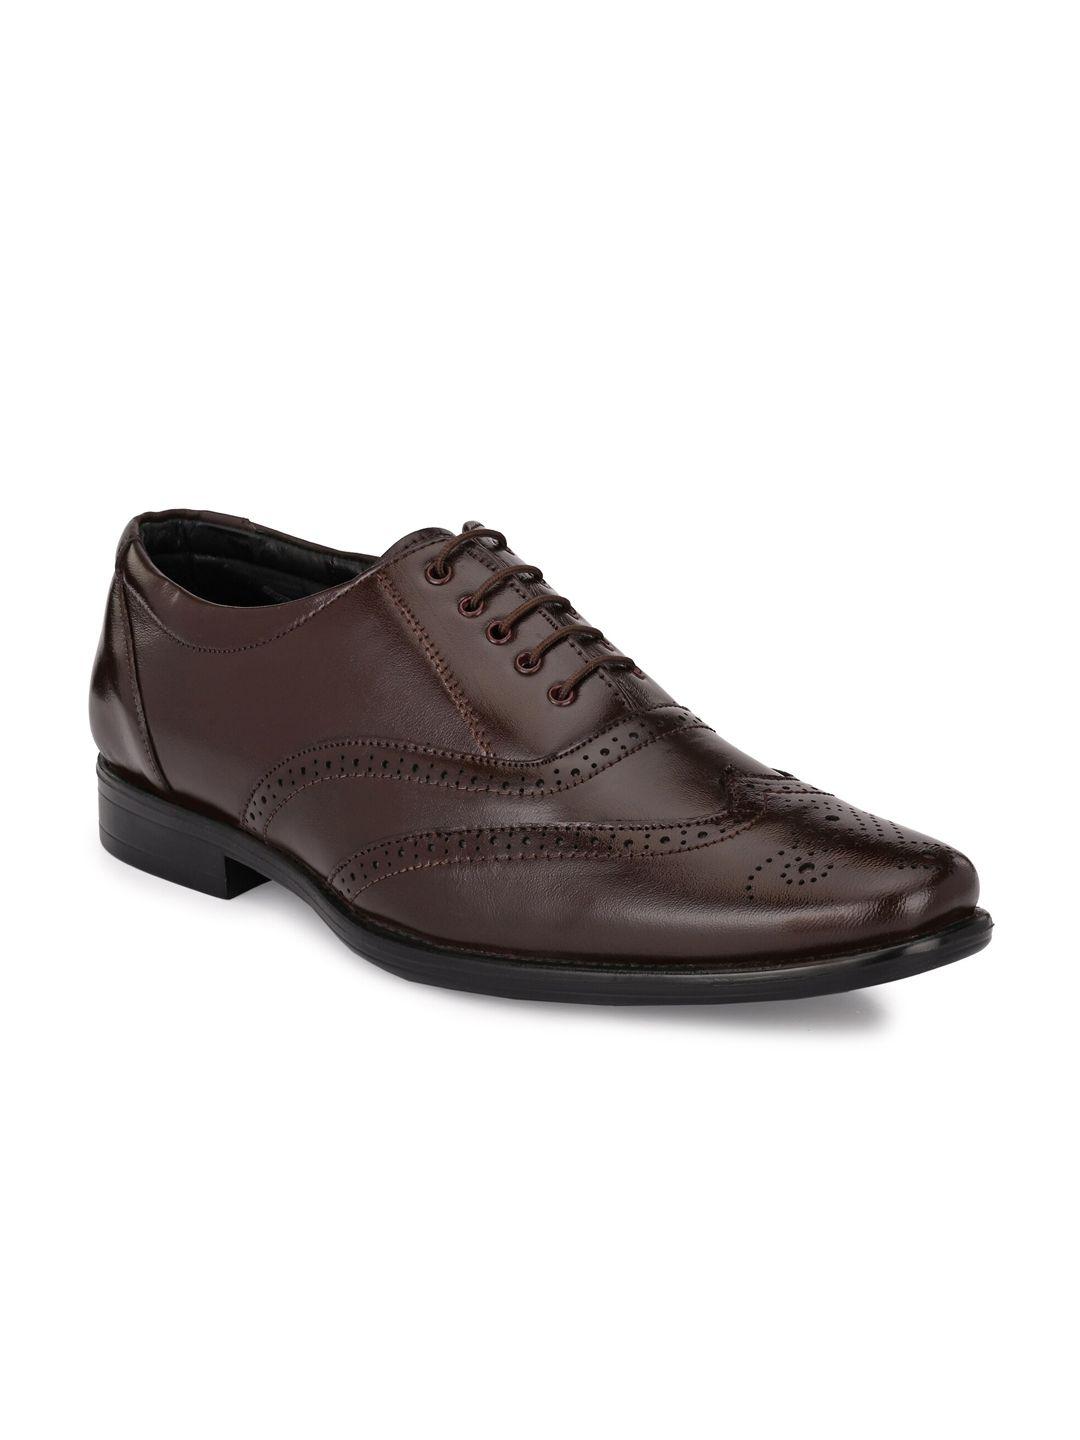 eego italy men brown leather brogue formal shoes